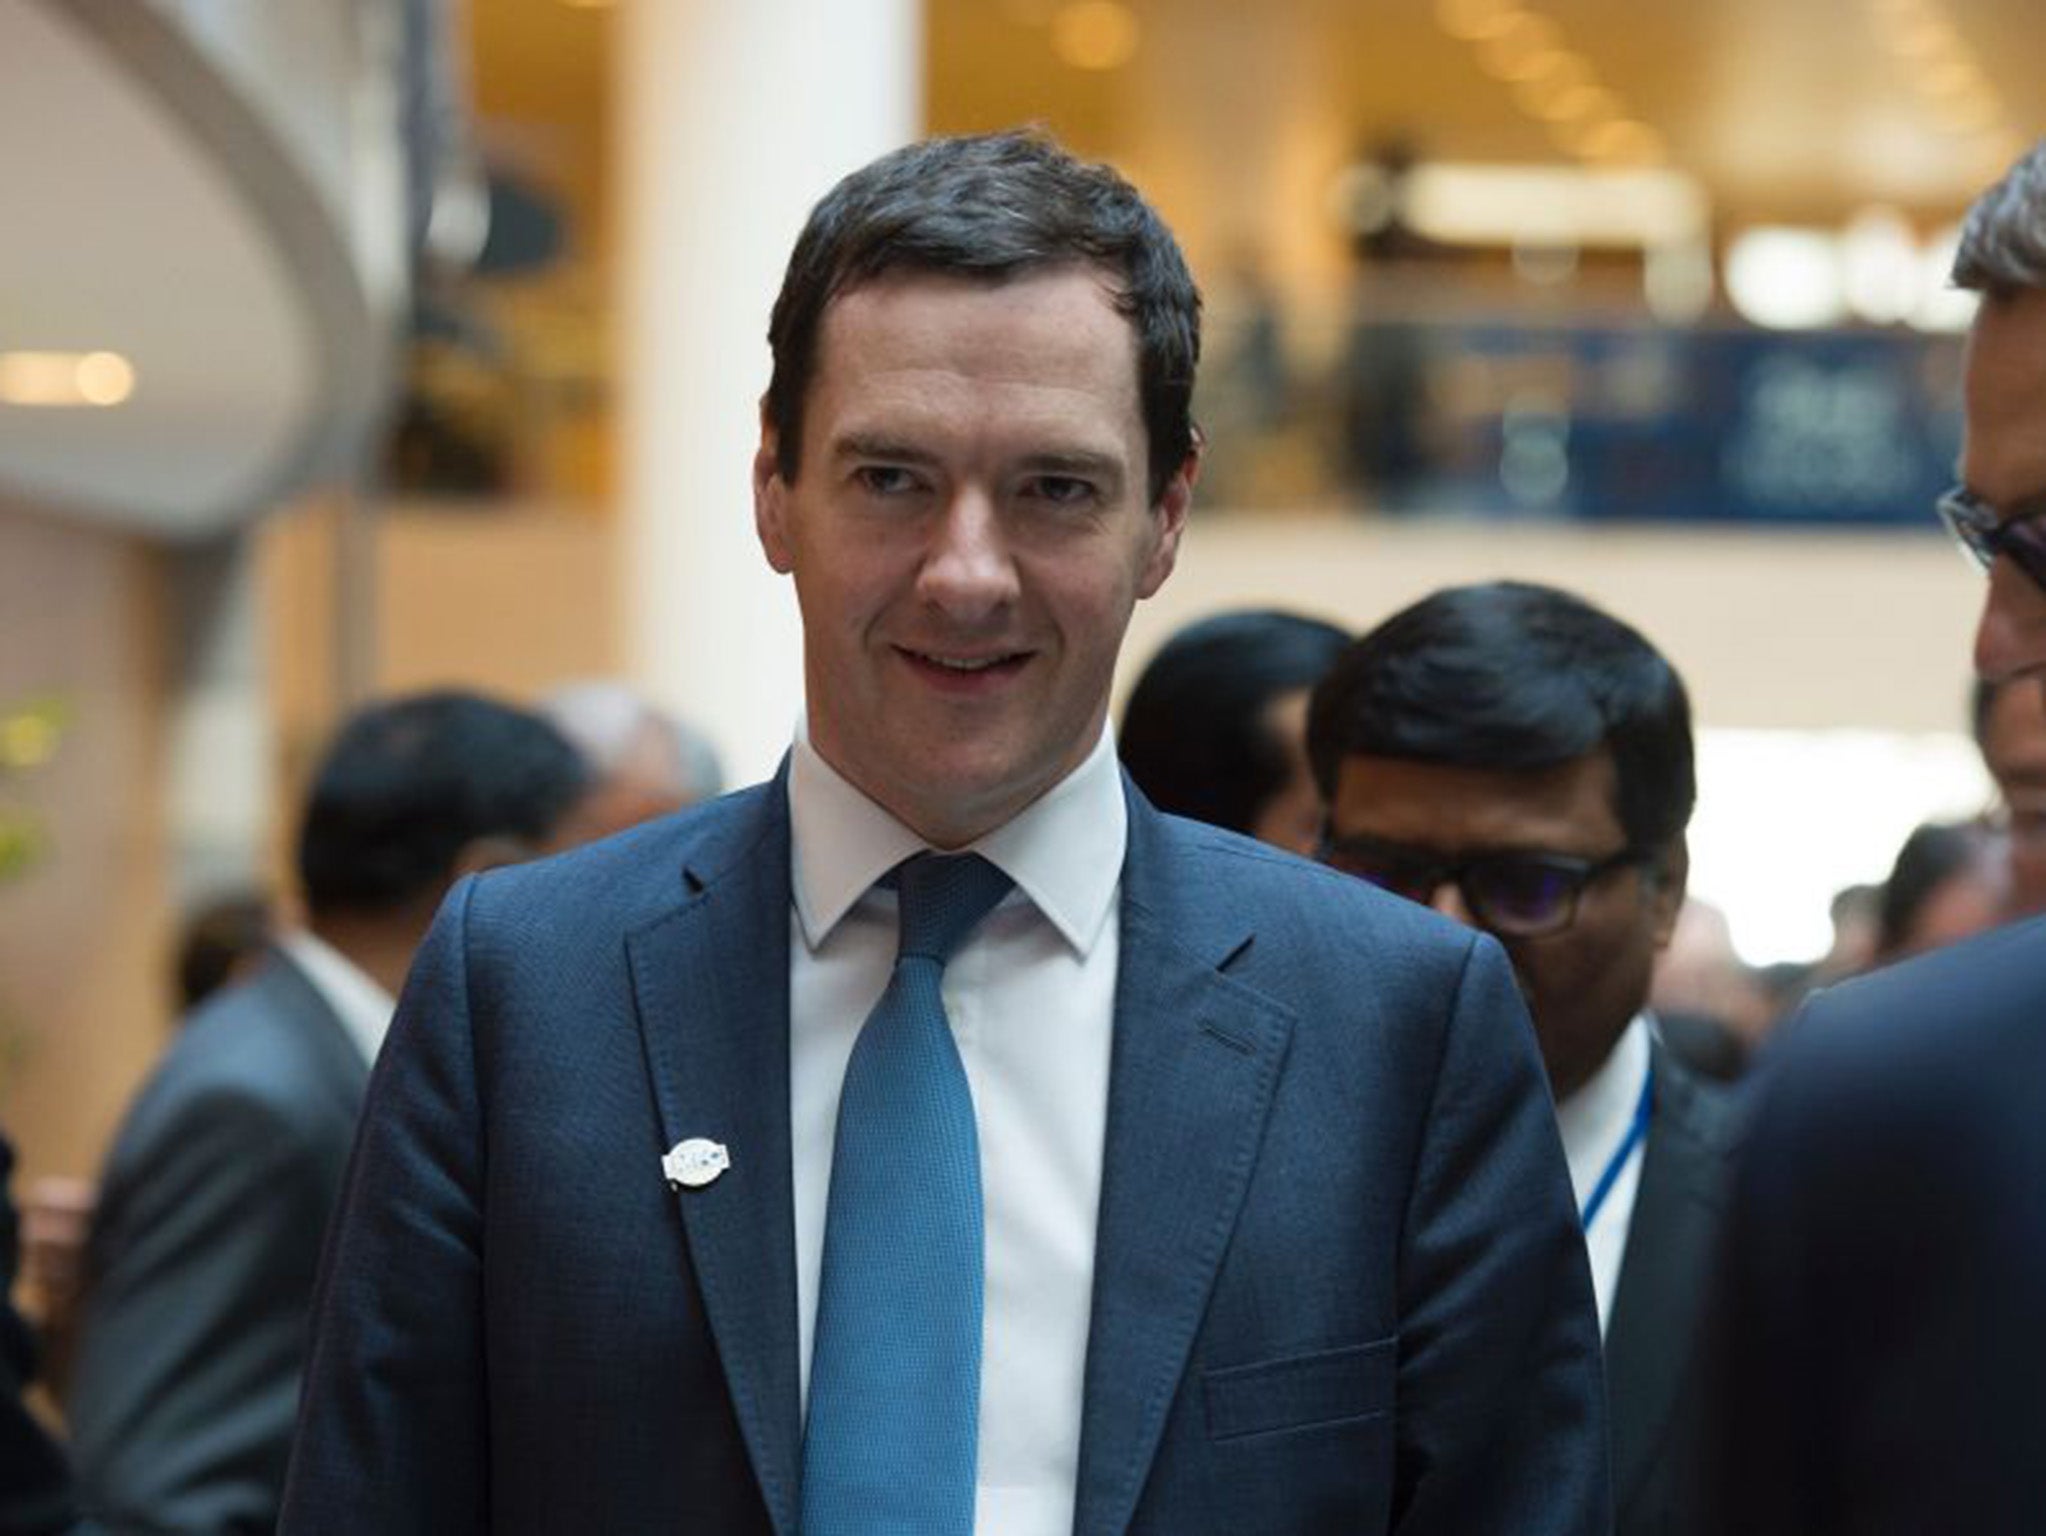 The Chancellor has borrowed £171bn more than he planned in 2010